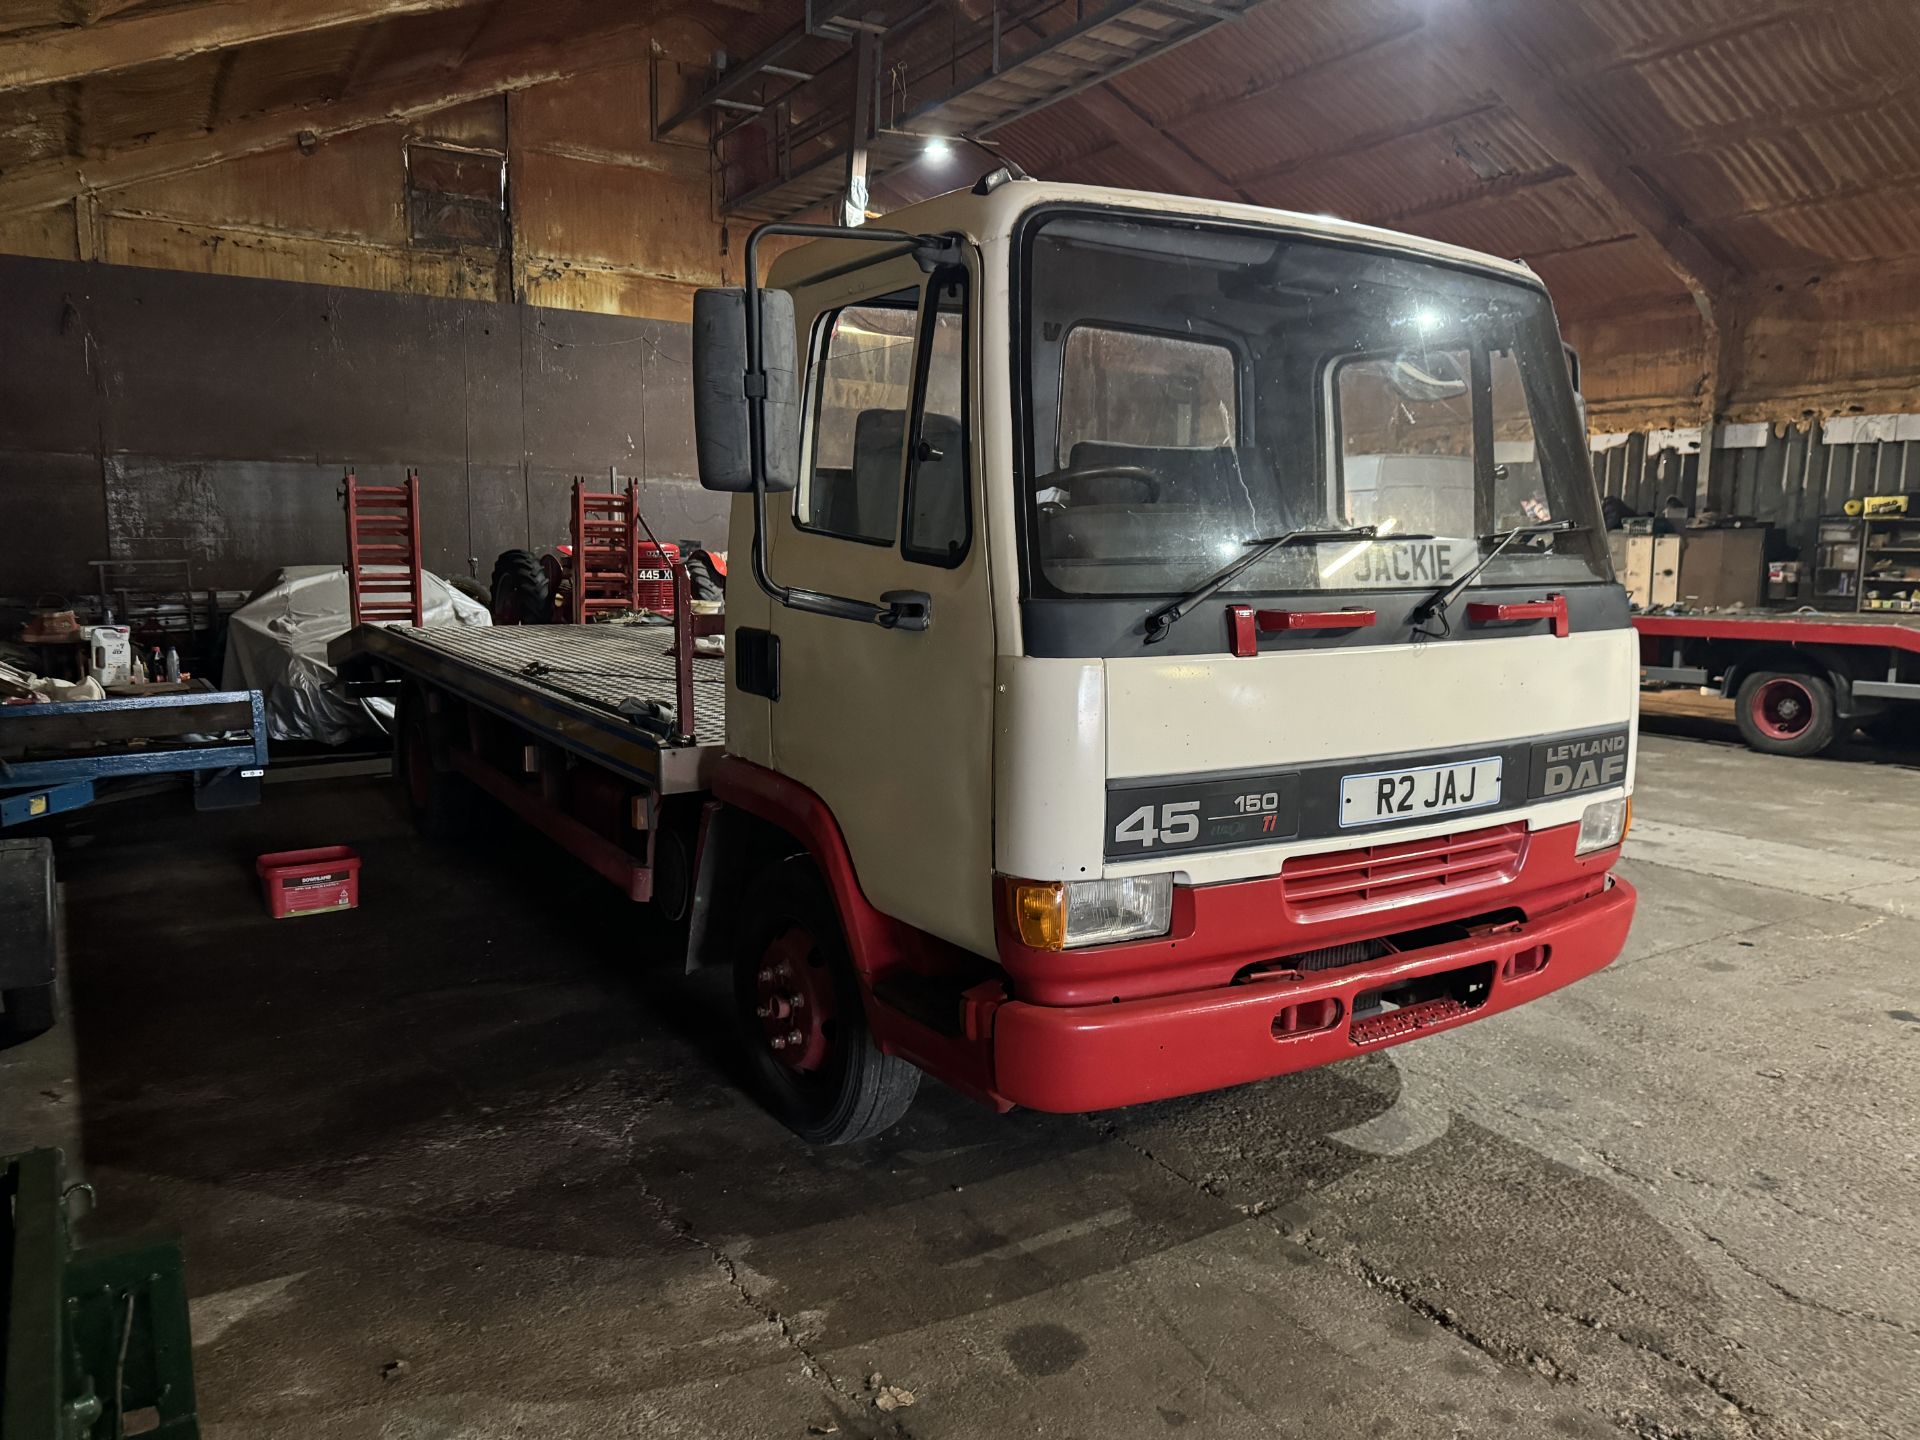 1997 Leyland DAF 45-150 24ft beever tail with loading ramps - Image 2 of 2